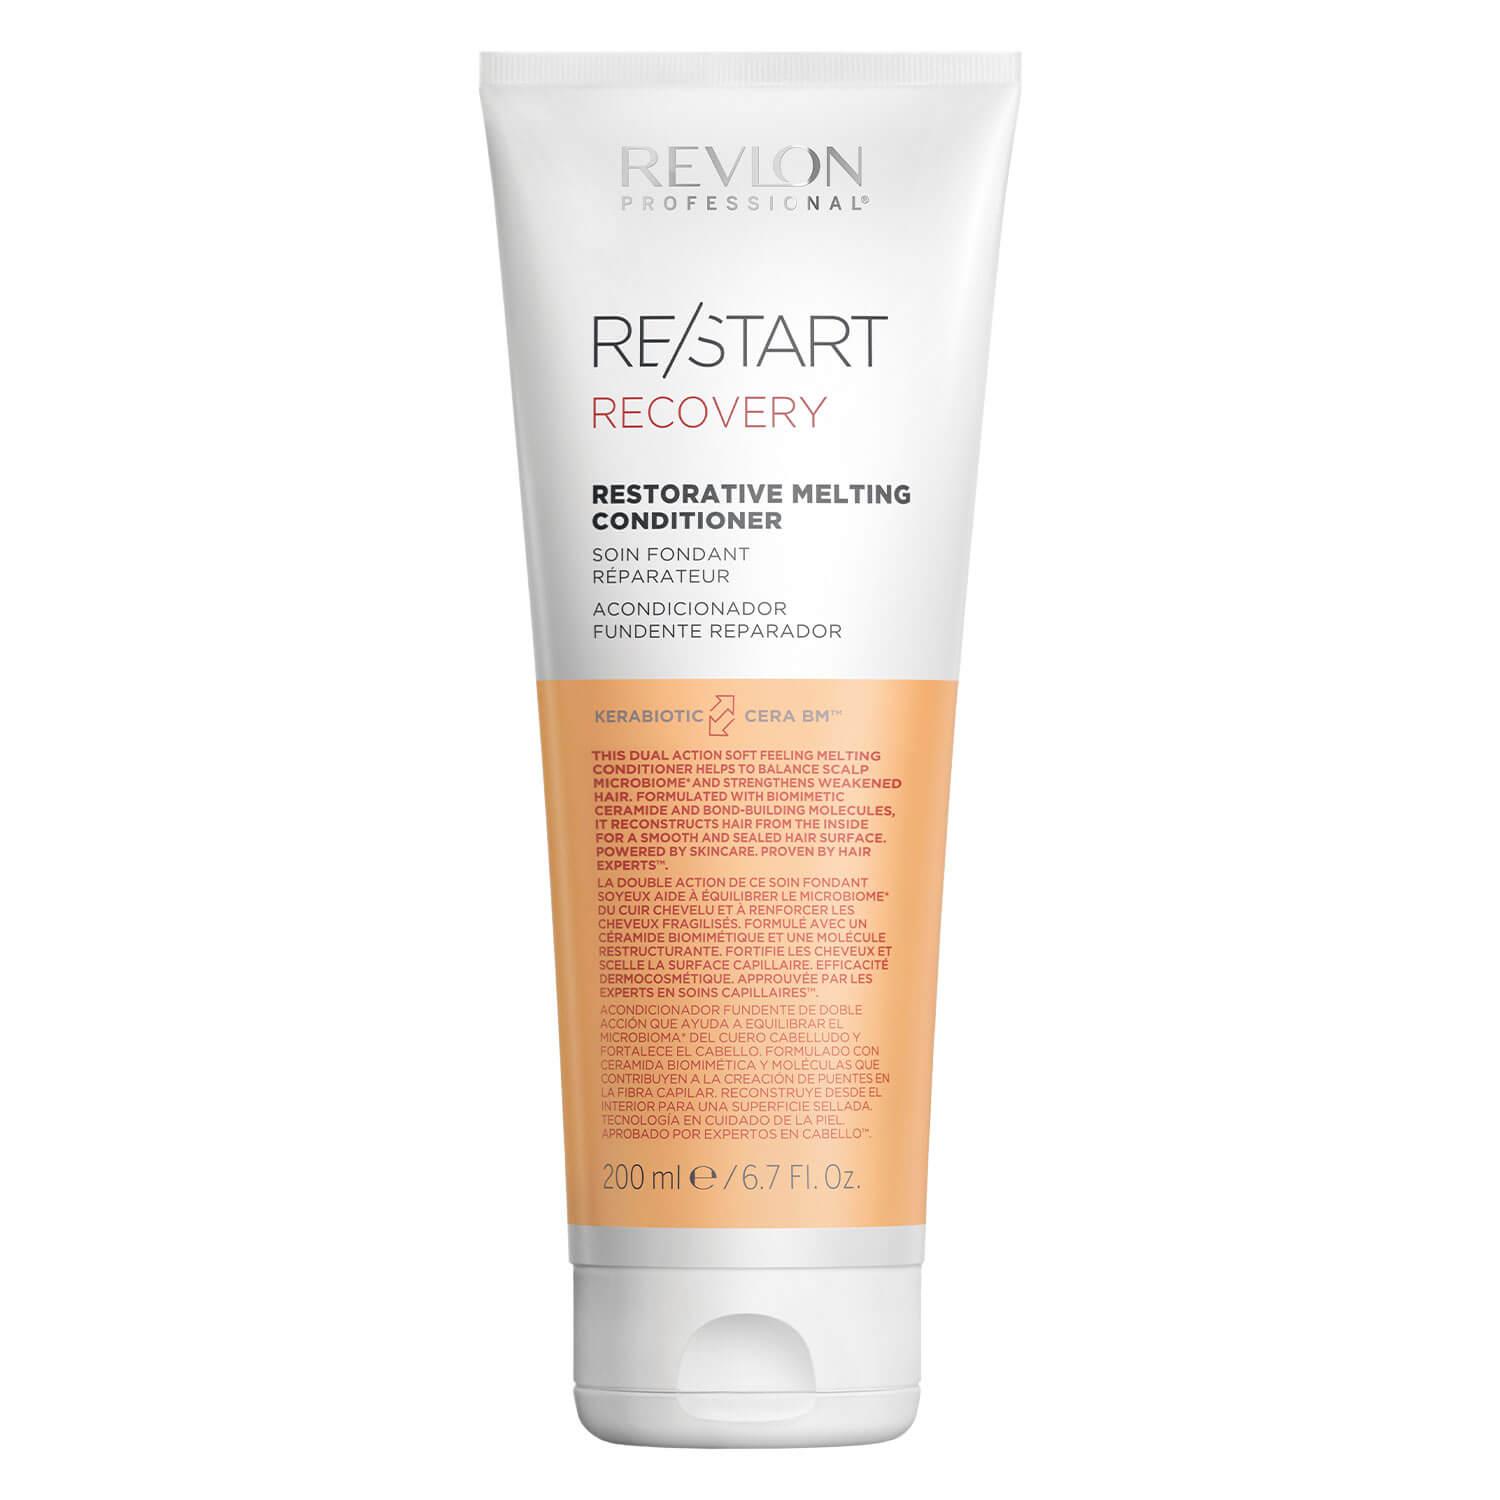 RE/START RECOVERY - Restorative Melting Conditioner